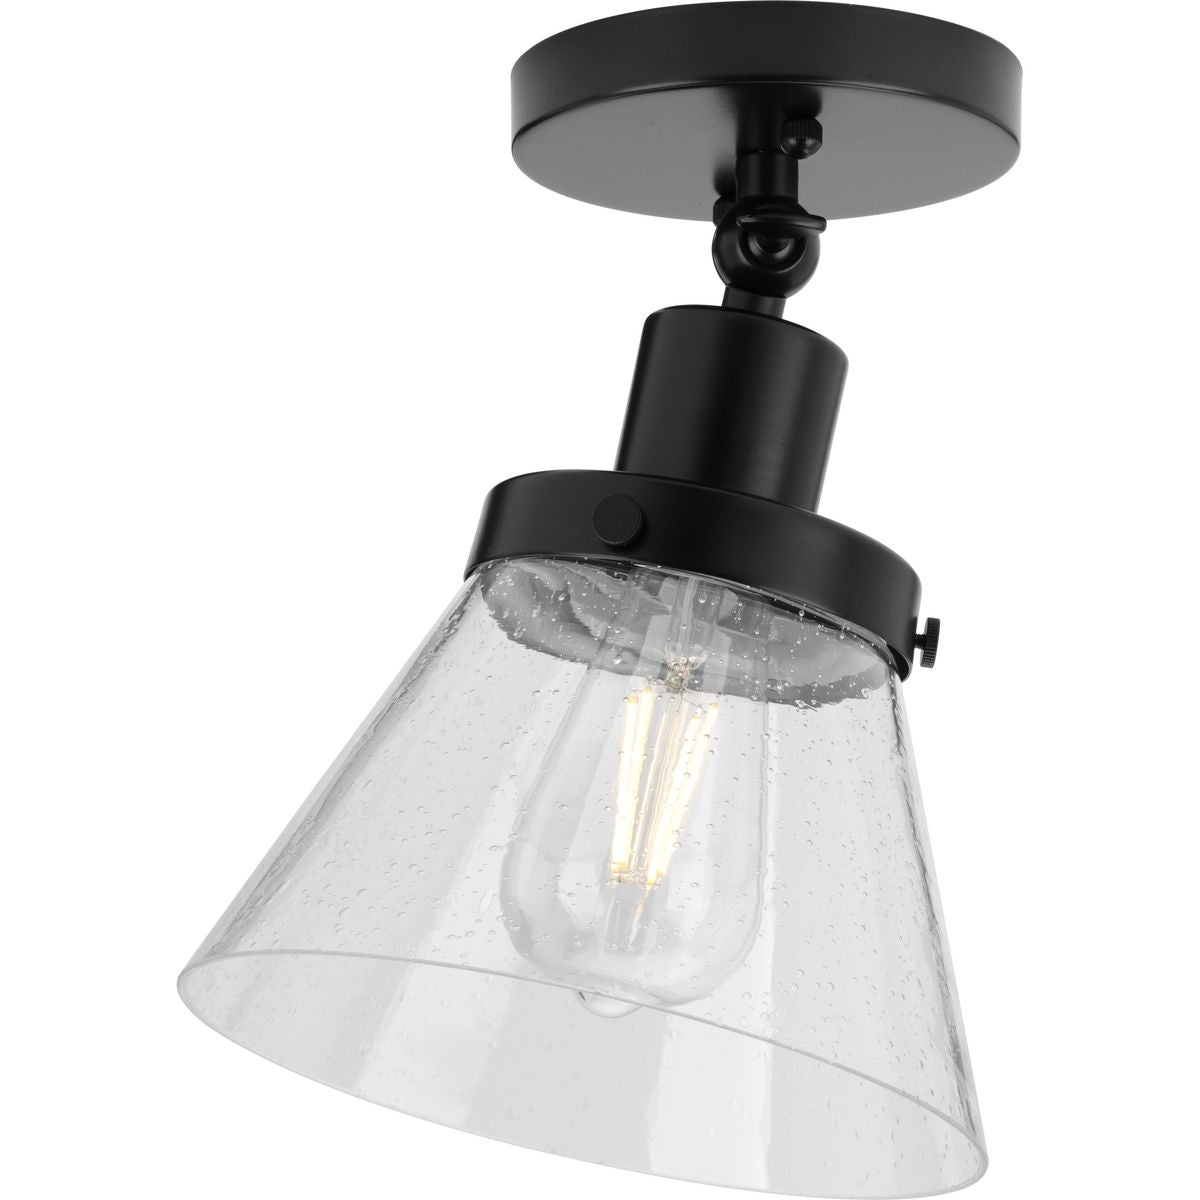 PROGRESS LIGHTING P350198-031 Matte Black Hinton Collection One-Light Matte Black and Seeded Glass Vintage Style Ceiling Light